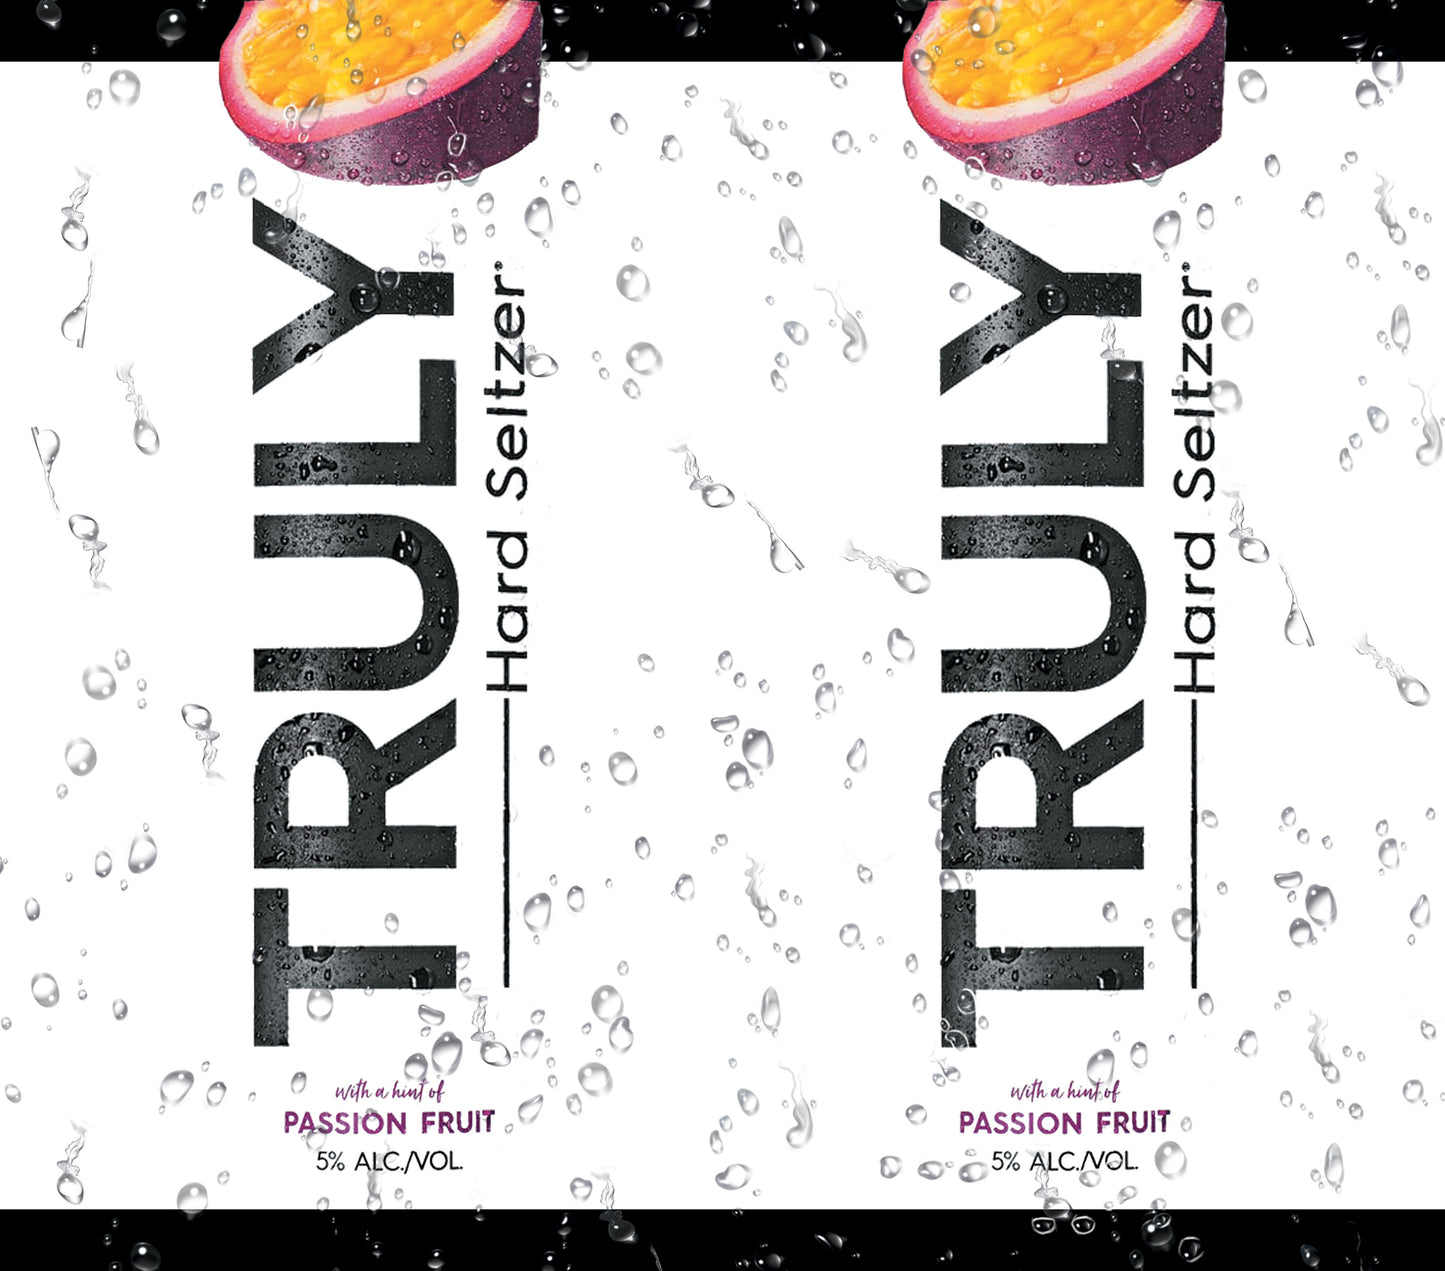 TRULY PASSION FRUIT